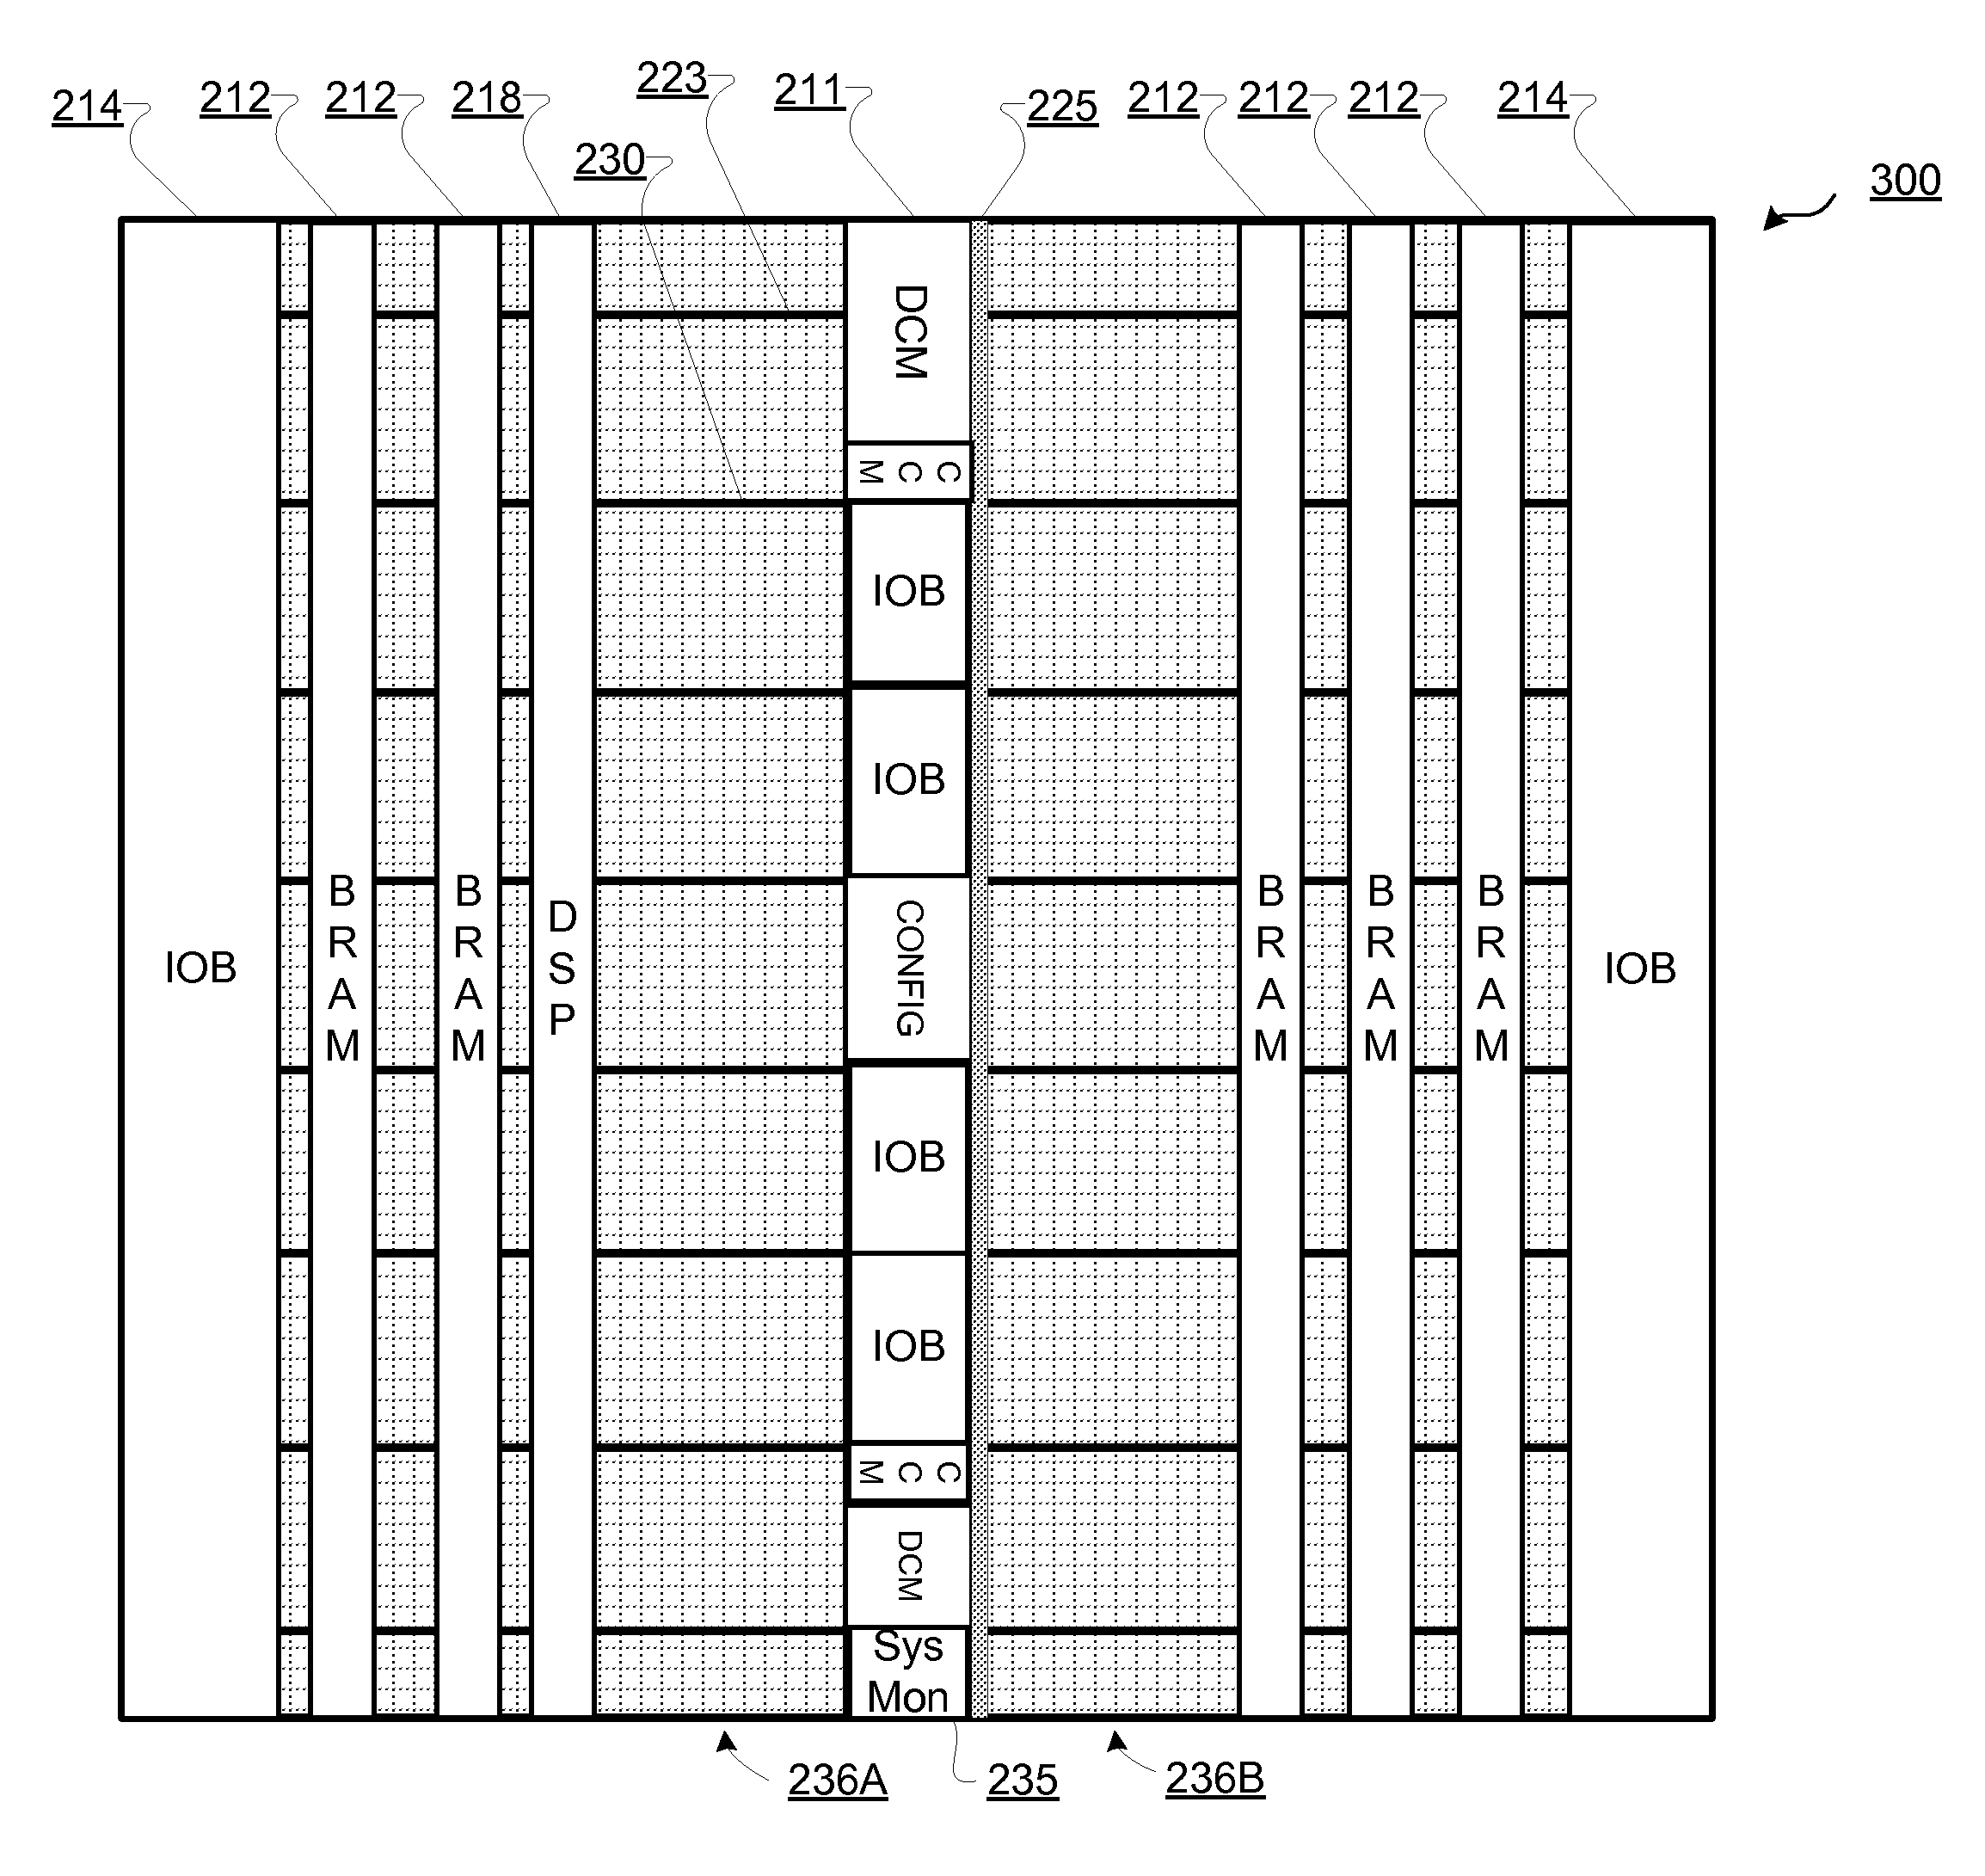 Formation of columnar application specific circuitry using a columnar programmable device